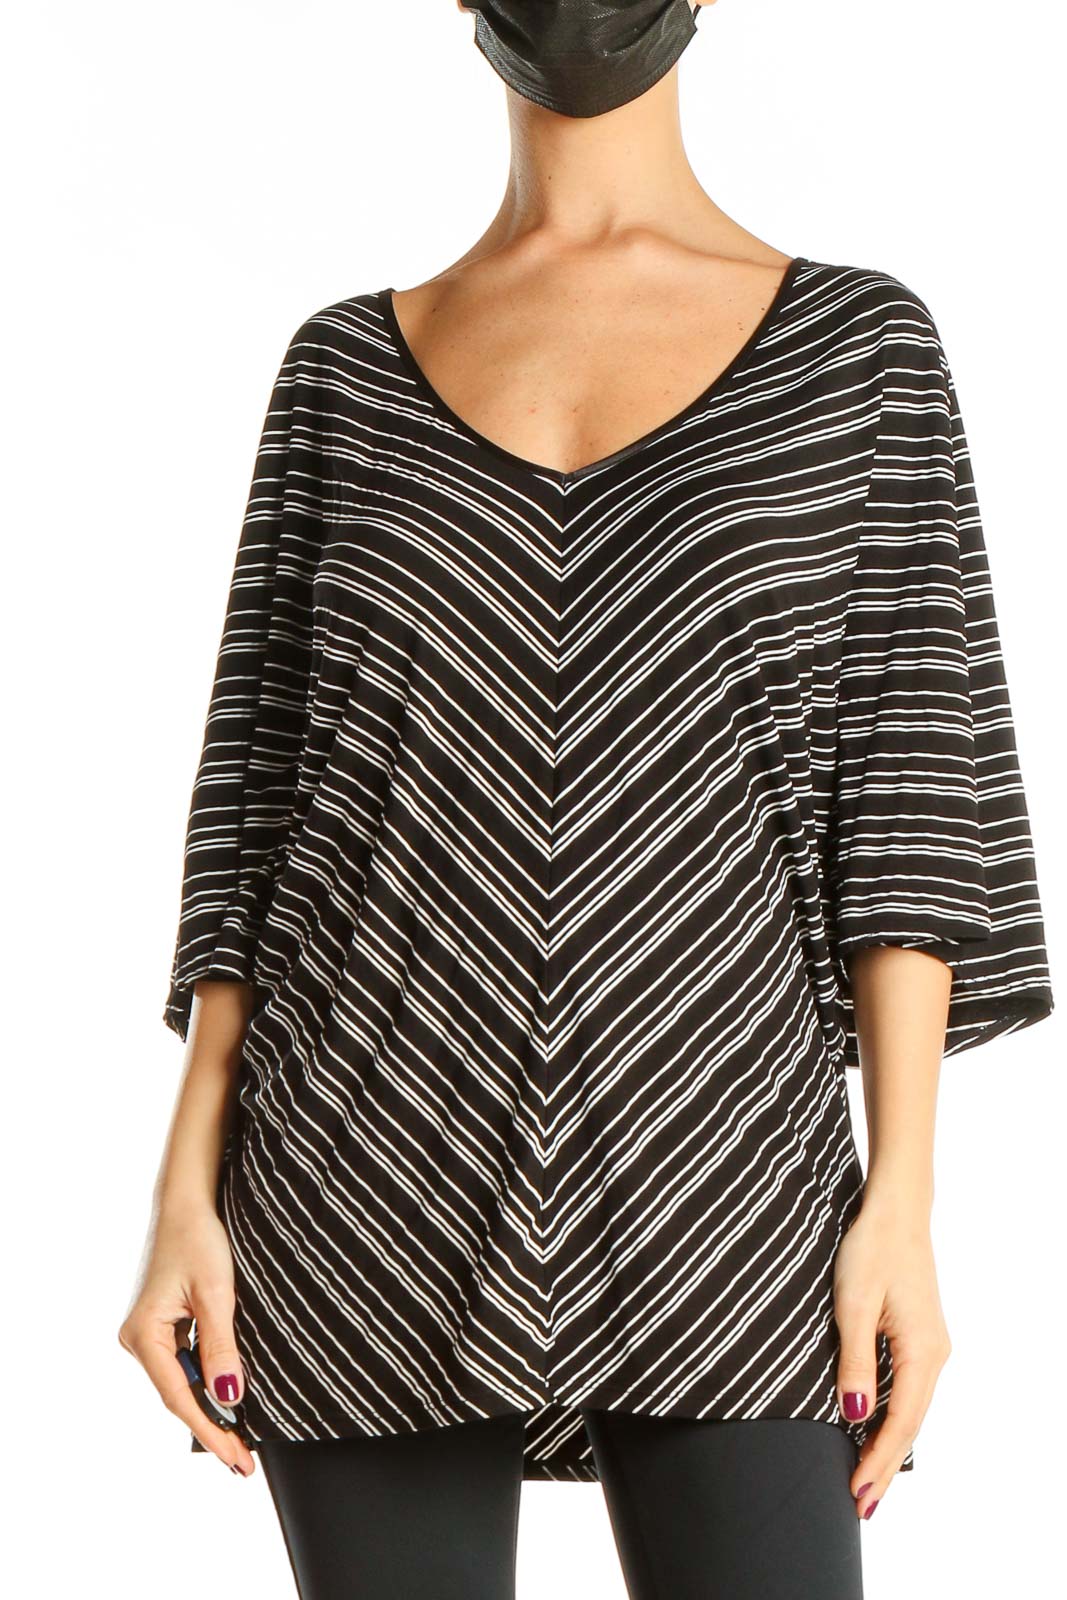 Black Striped All Day Wear Top Front